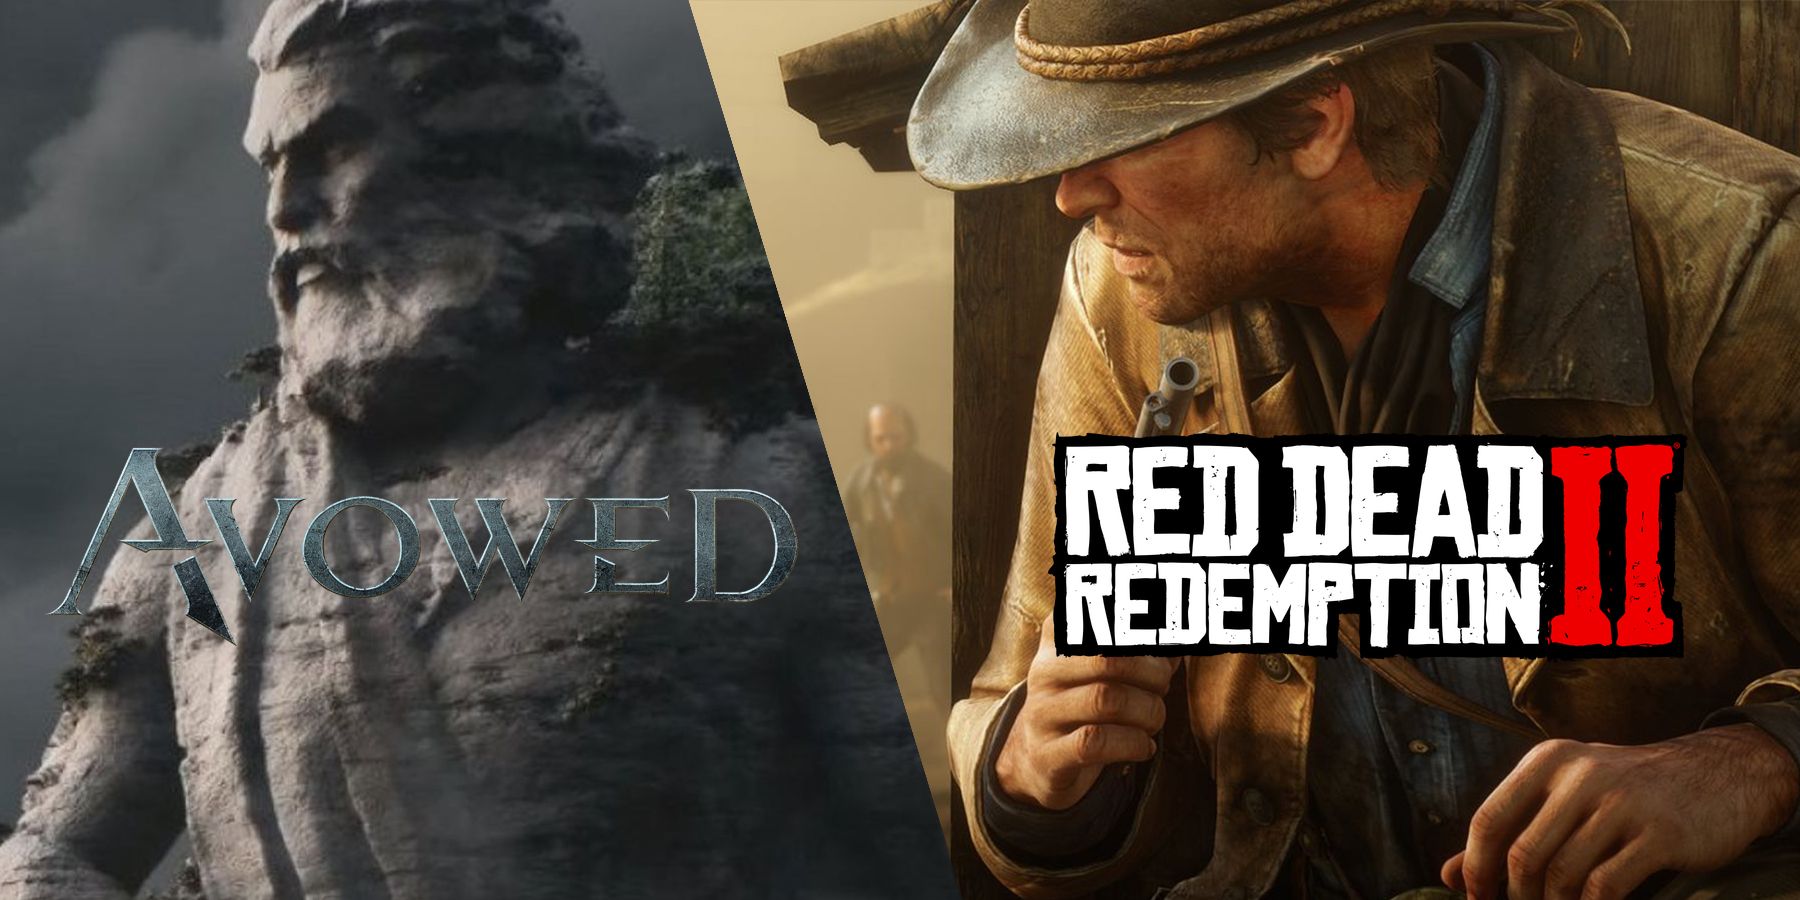 Avowed Could be Pillars of Eternity's Red Dead Redemption 2